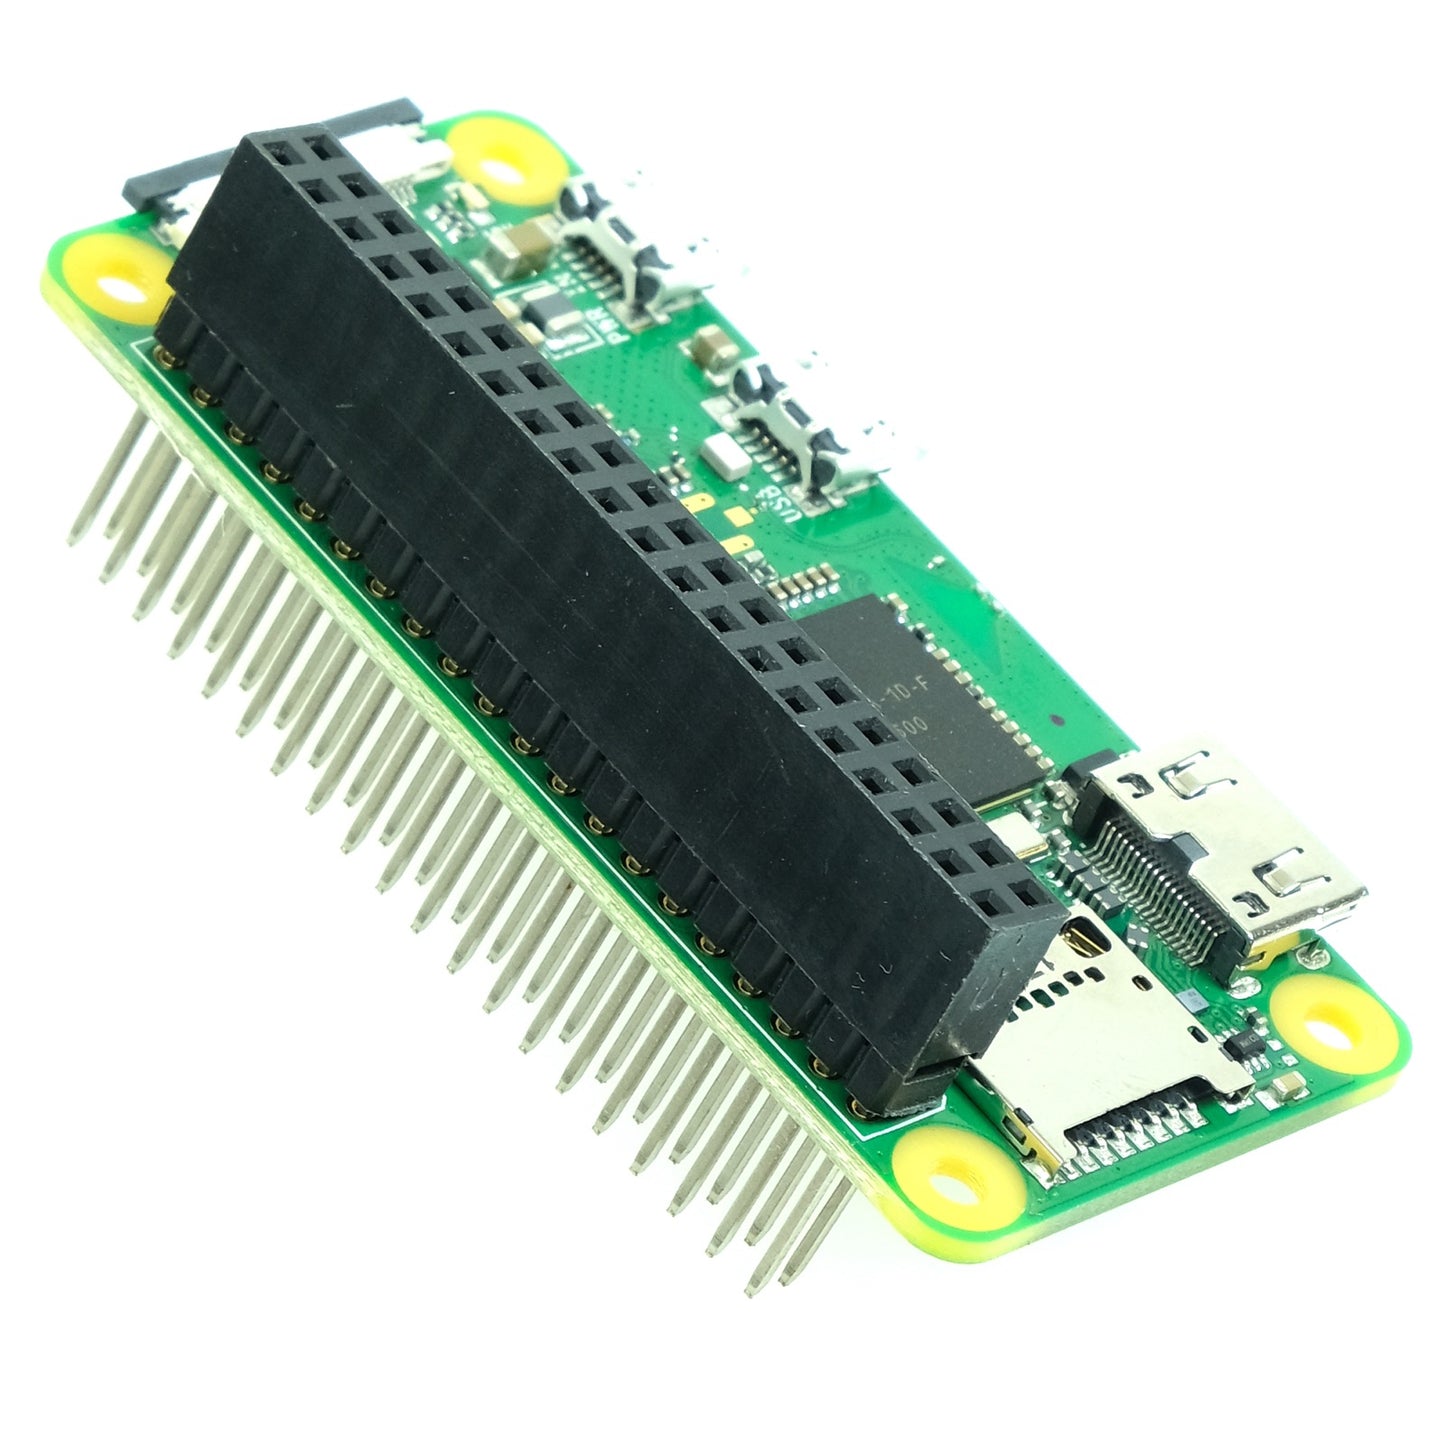 Stackable Female Header for Raspberry Pi, 2x20, 2-pack